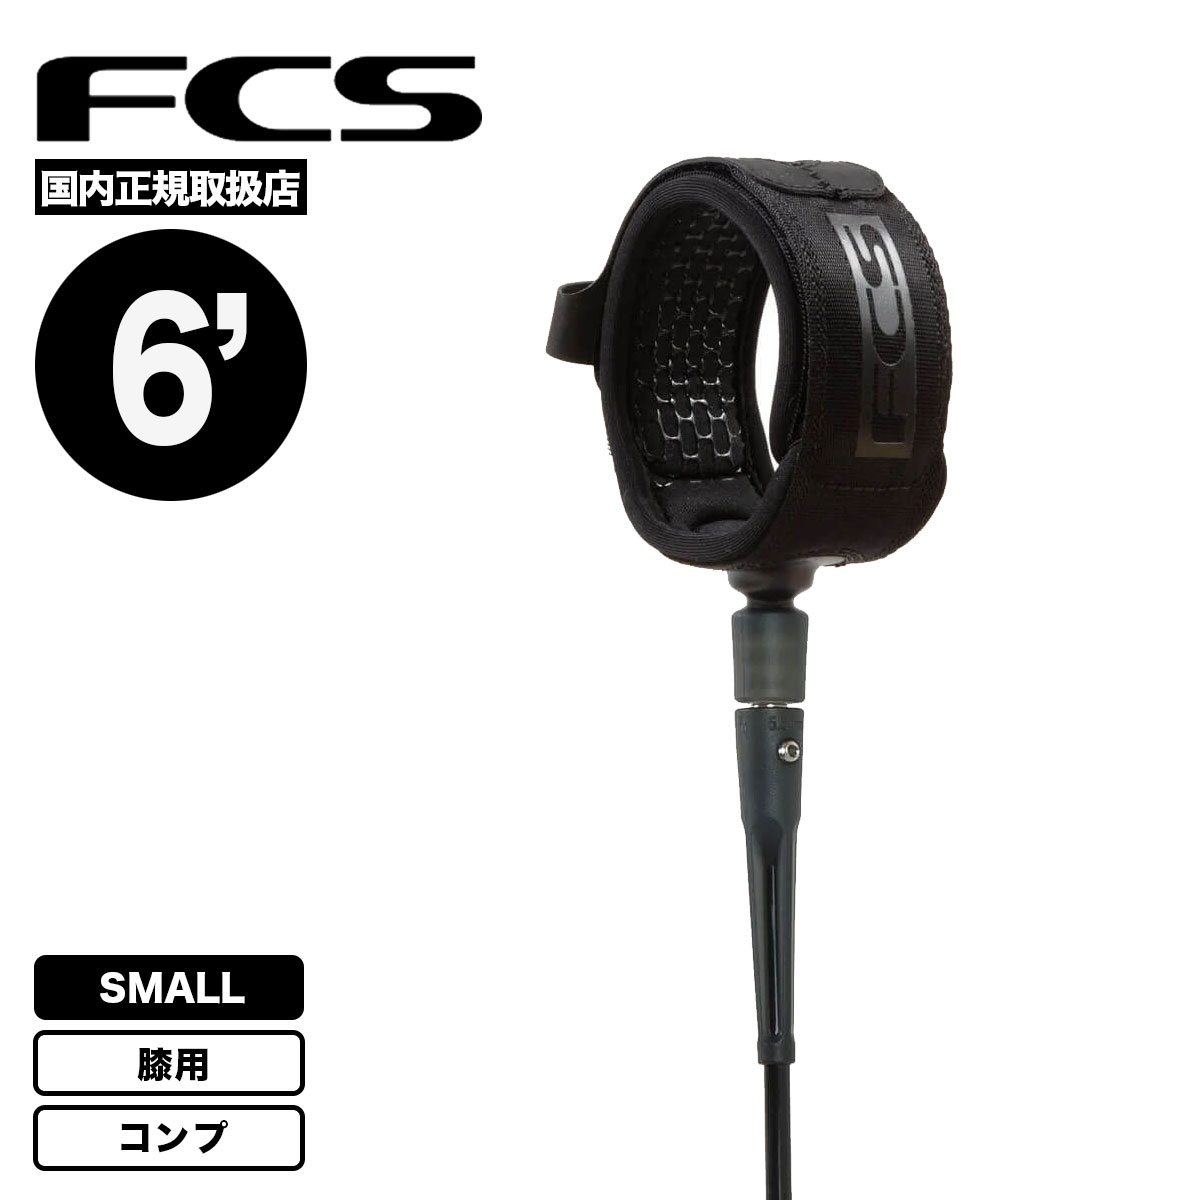 ꡼女 ե fcs ڥƥ å󥷥 ꡼  եܡ ե ꡼ 6ft ɨ ⡼륵  Ҷ  COMPETITION ESSENTIAL LEASH 6' (SMALL CAFF)ECOS-BLK-06F